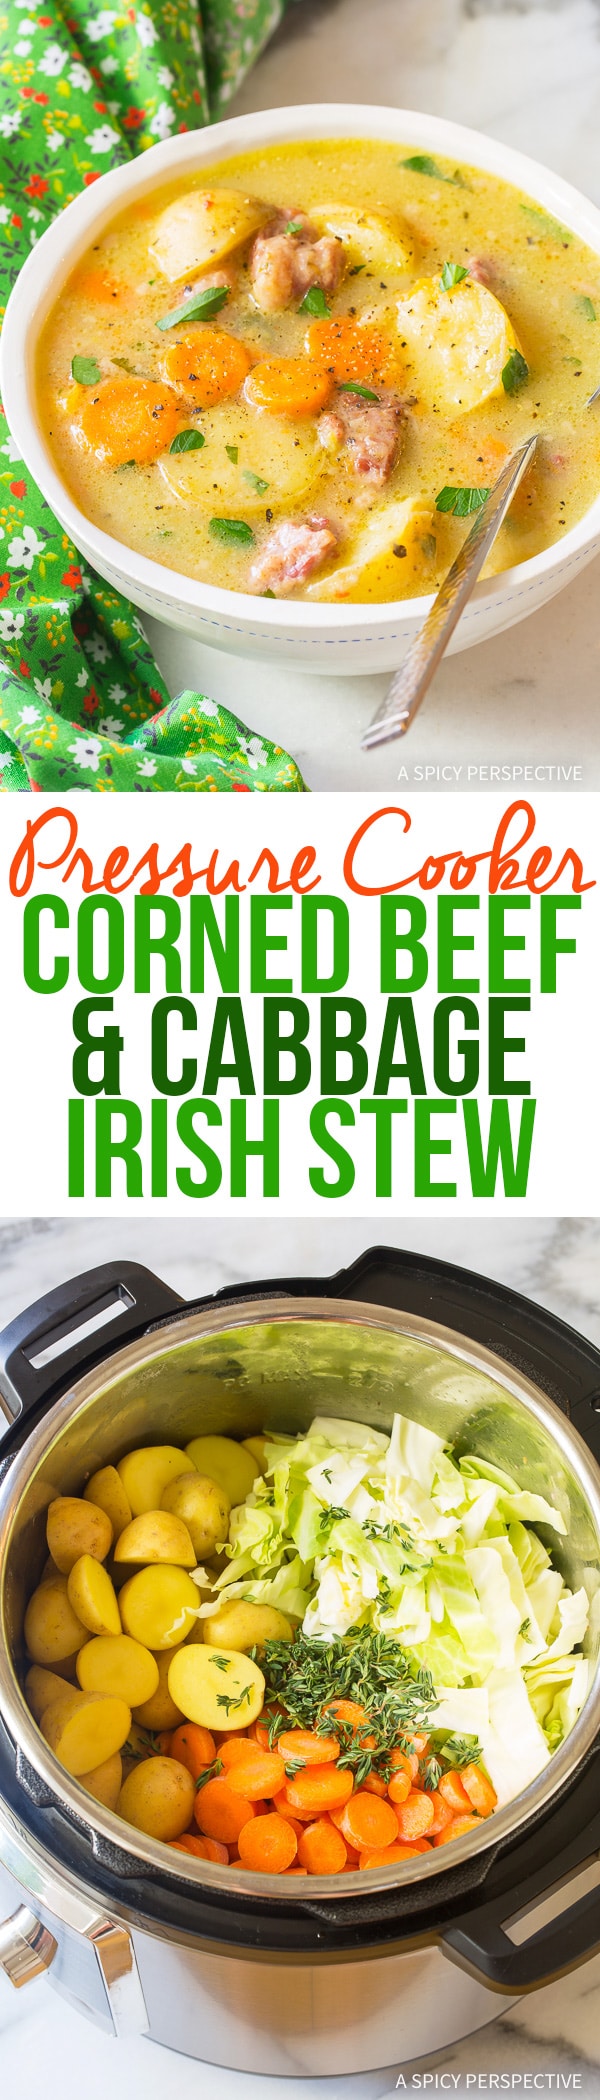 Easy Pressure Cooker Corned Beef Cabbage Irish Stew Recipe (Instant Pot for Saint Patrick's Day!)